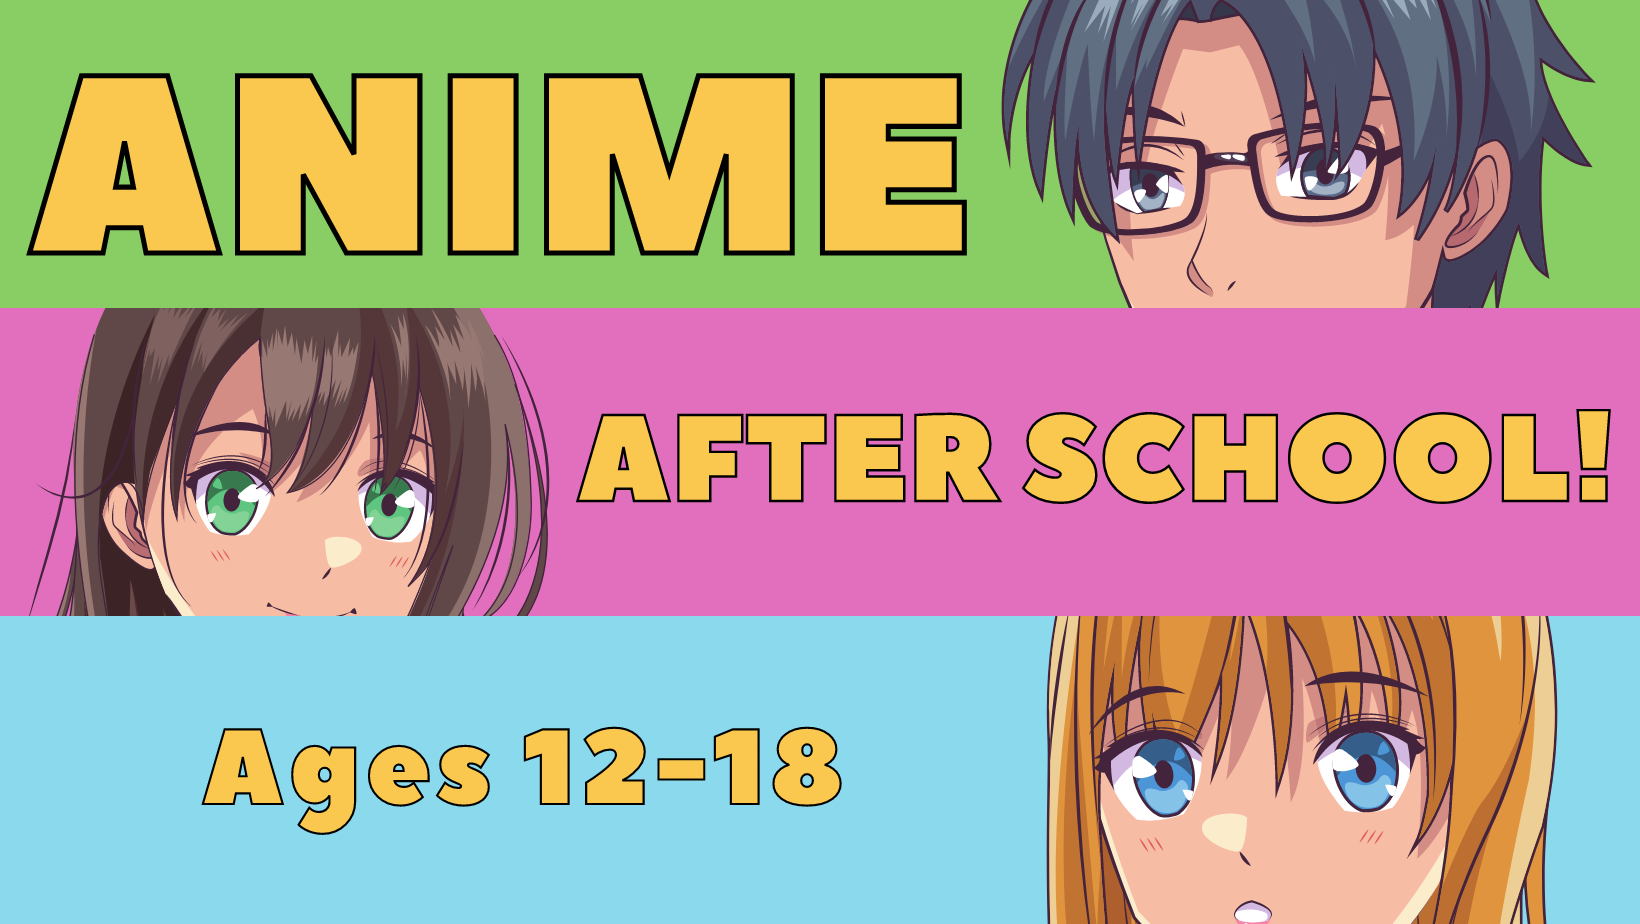 the words anime after school on a green, pink, and blue background